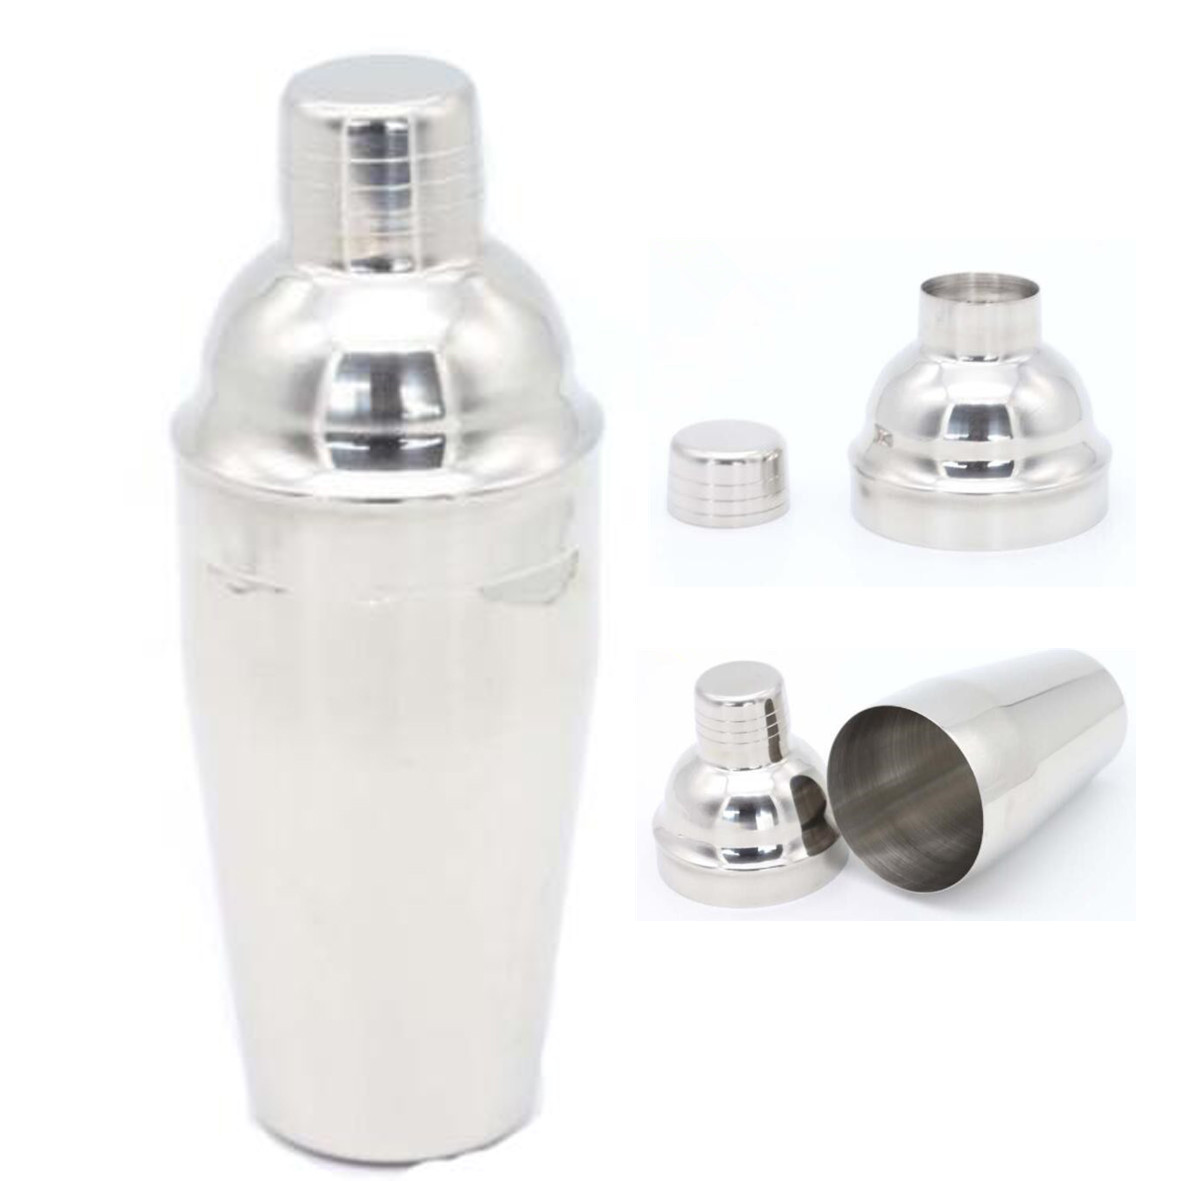 GL-ELY1242 18.6oz Stainless Steel Cocktail Shaker